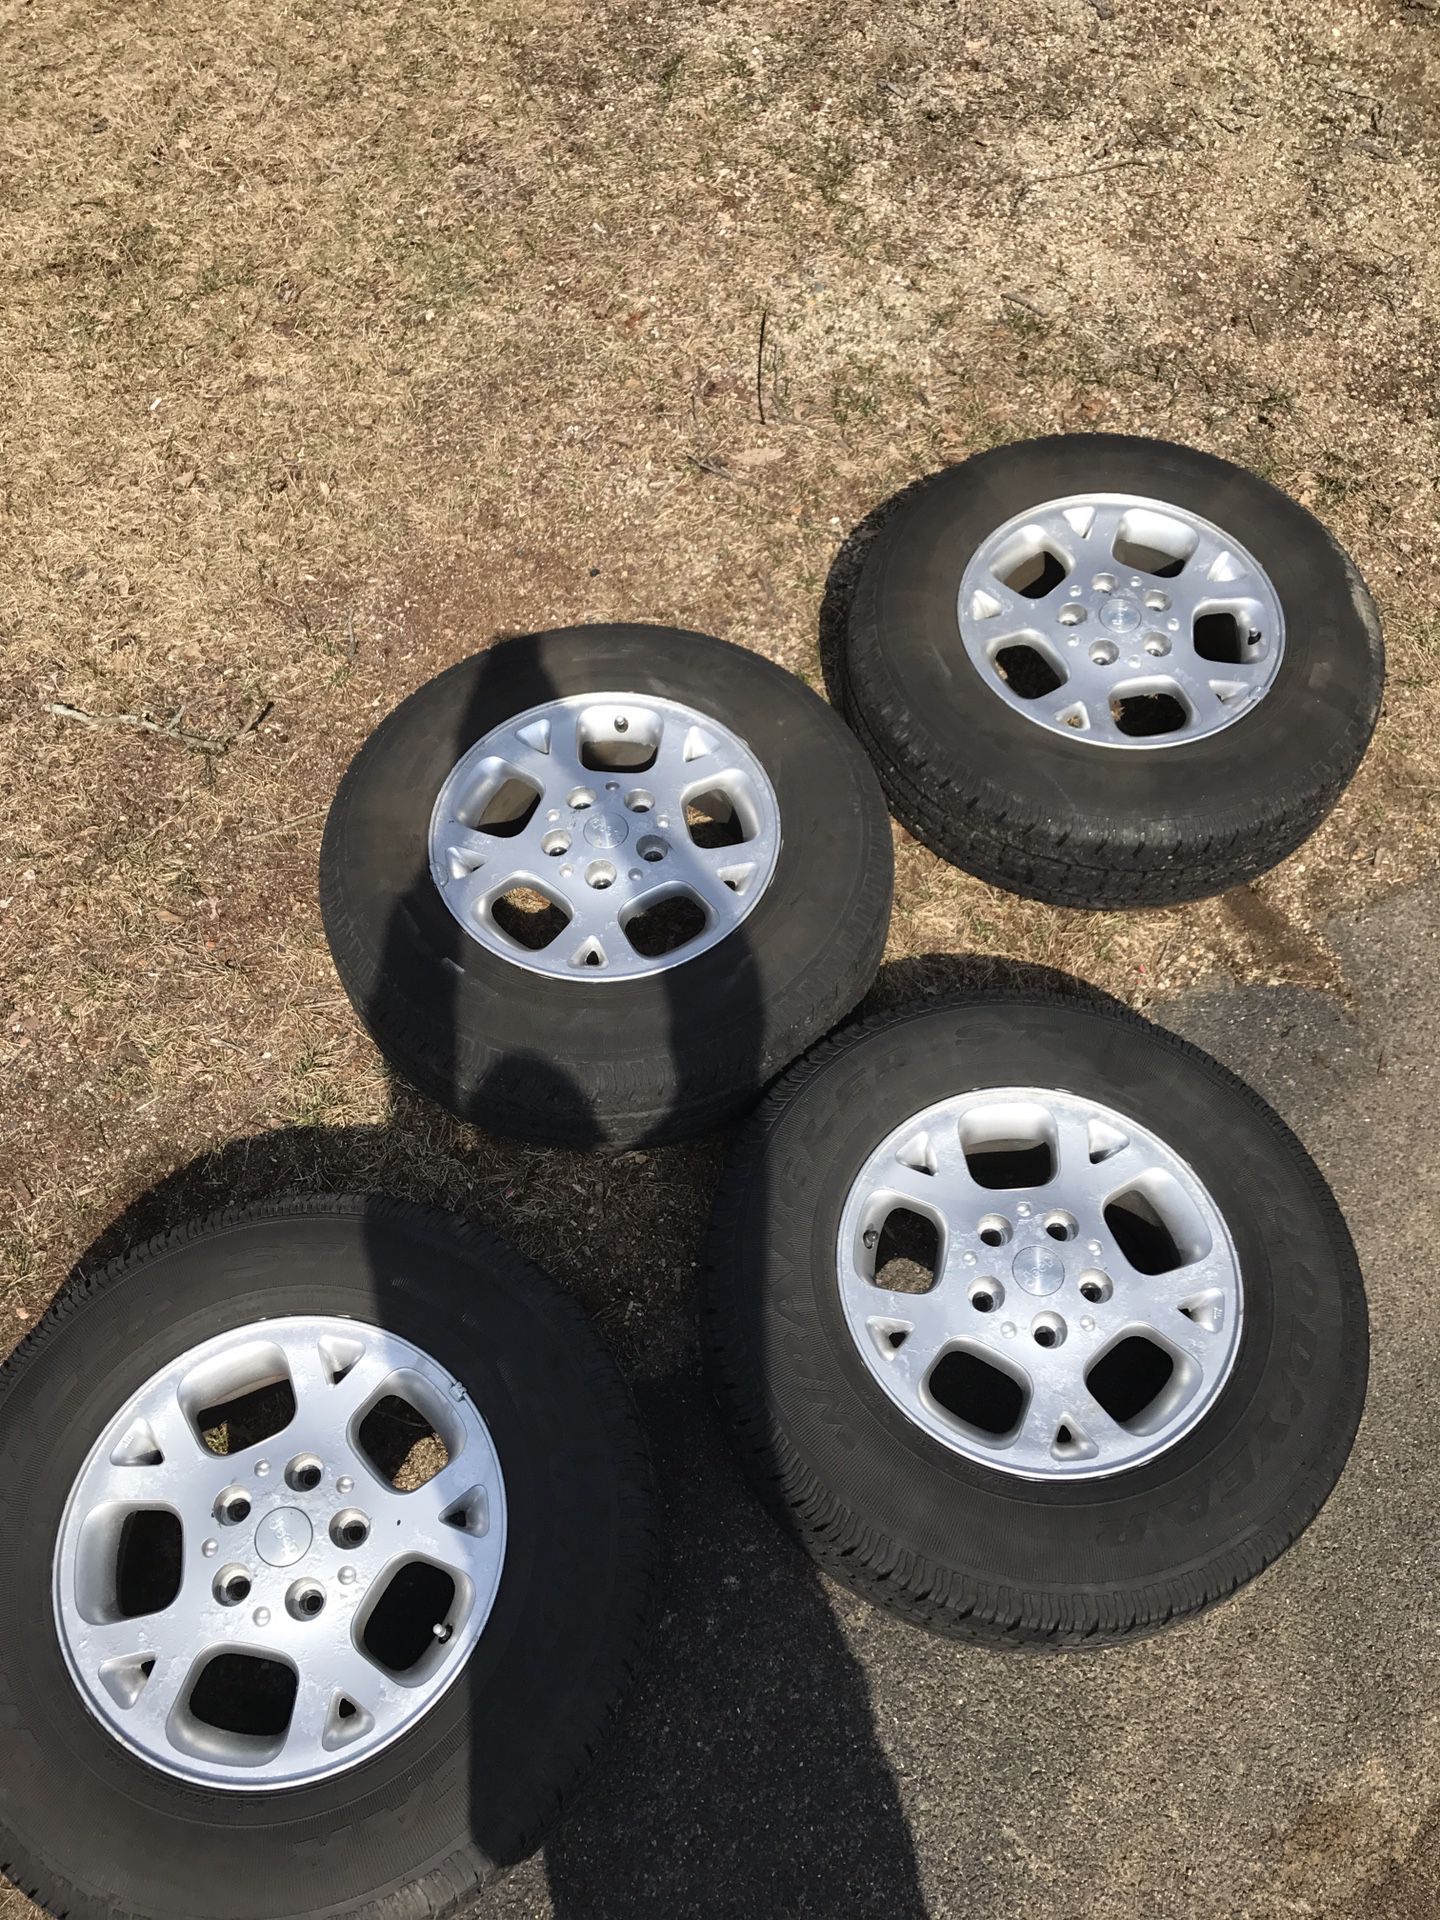 1999-2004 Jeep Grand Cherokee wheels and tires